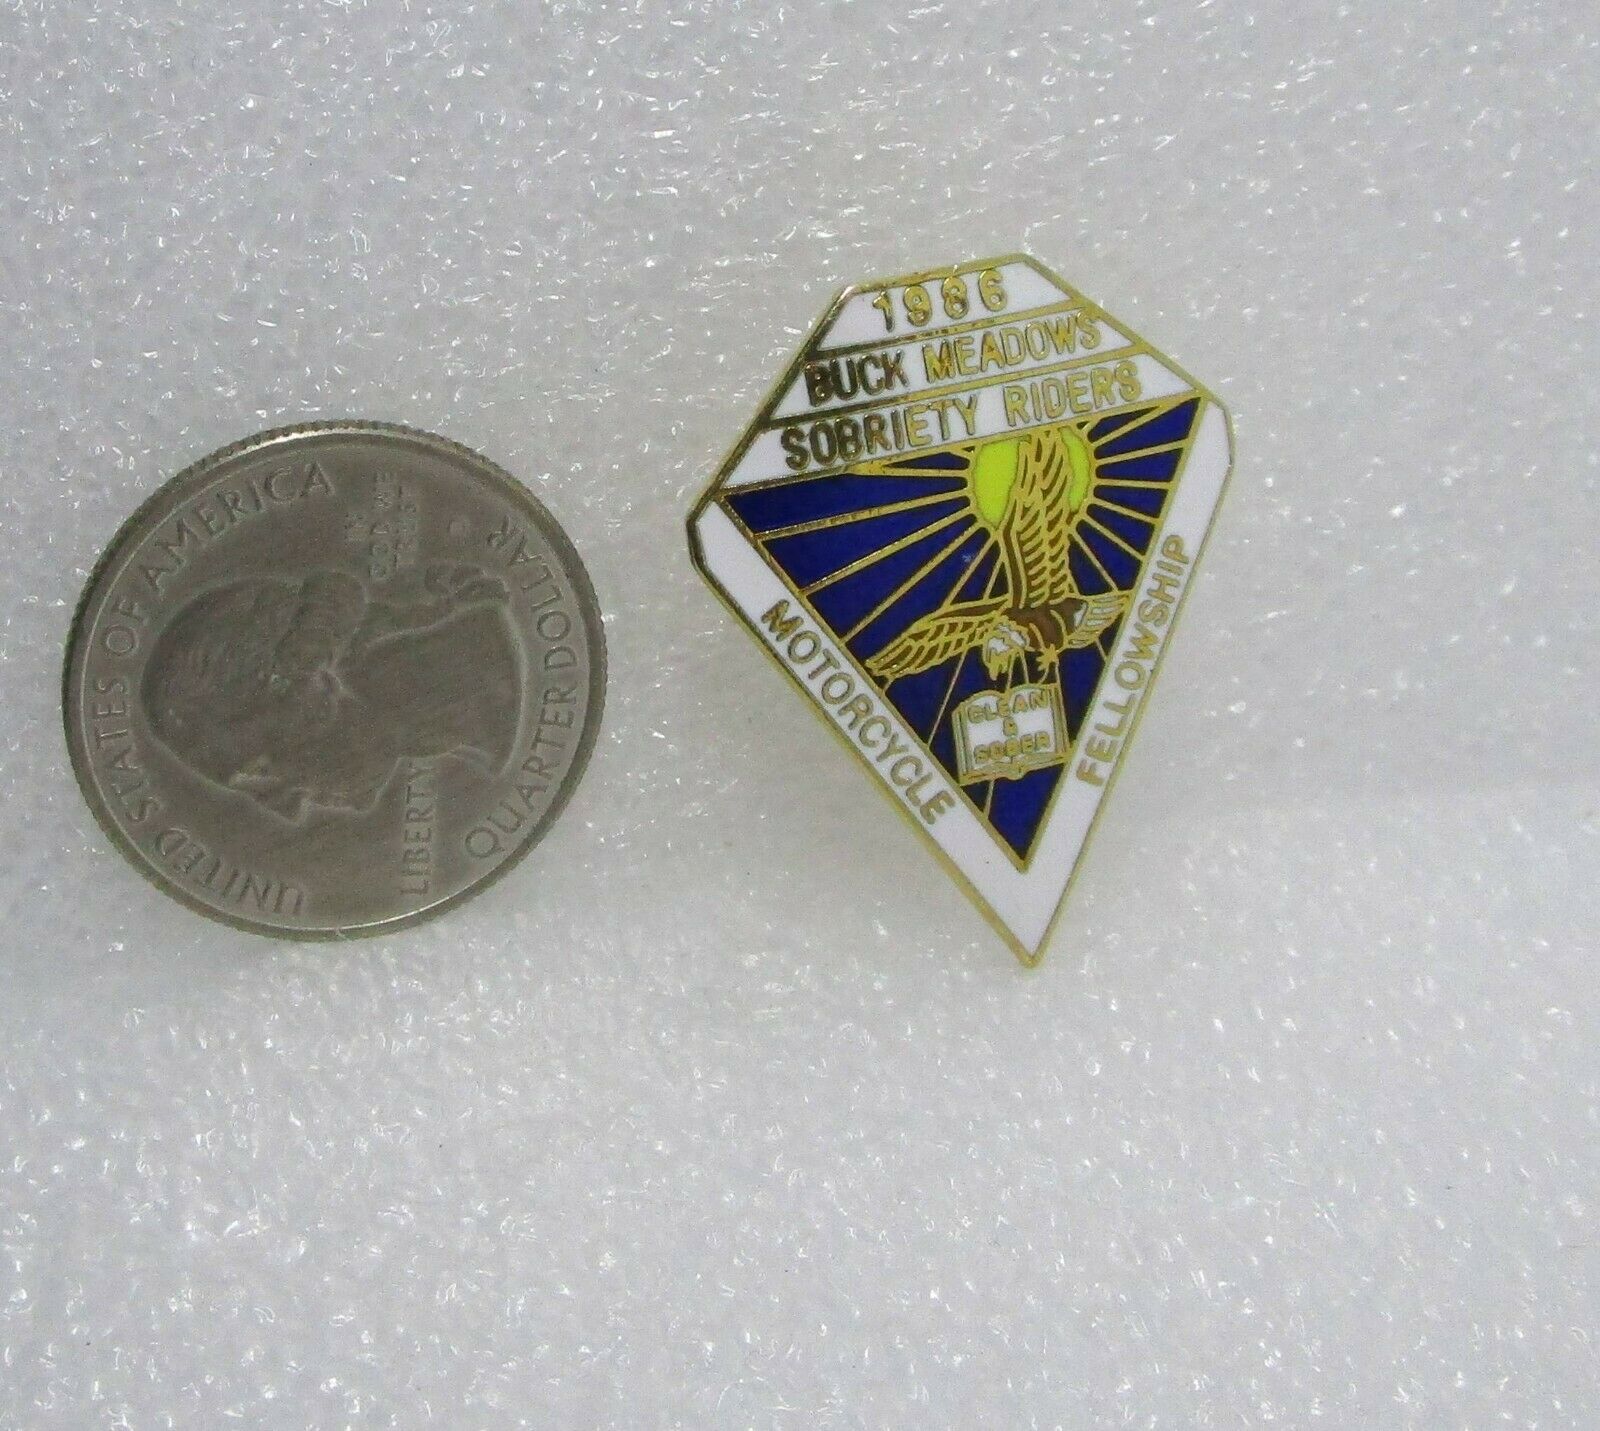 1988 Buck Meadows Sobriety Riders Motorcycle Fellowship Screw On Pin